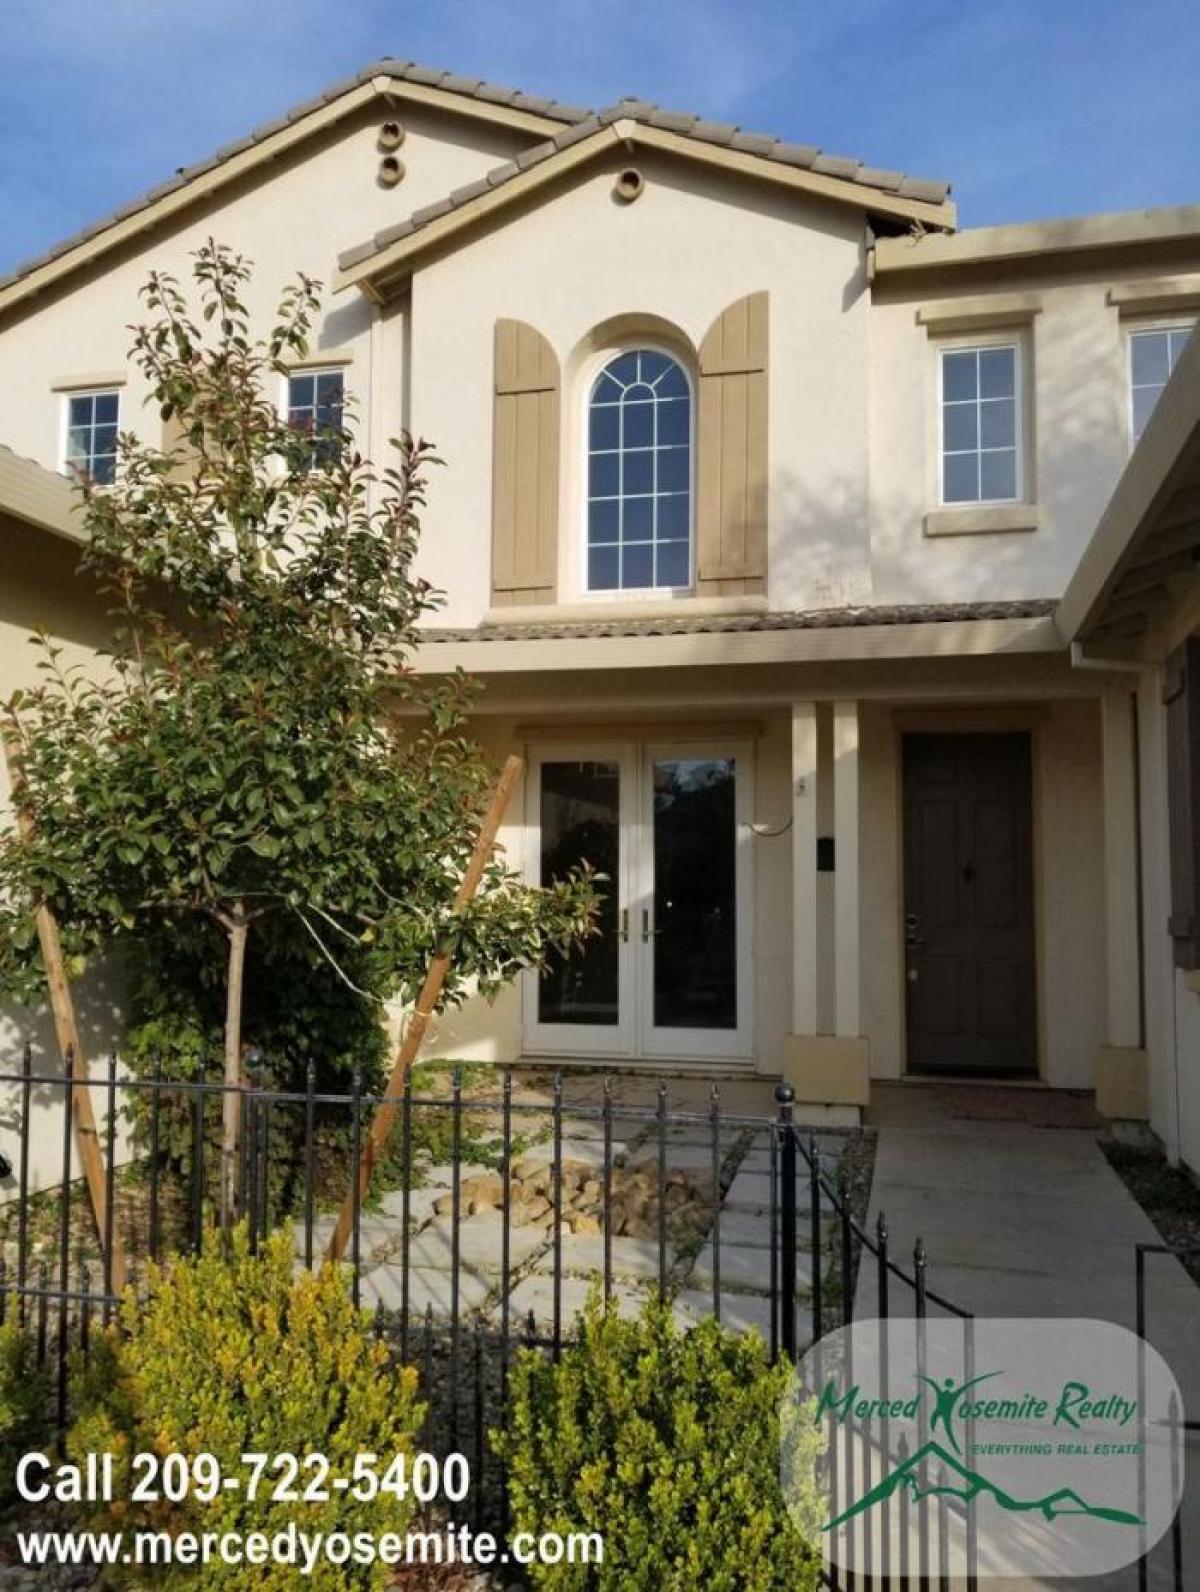 Picture of Home For Rent in Merced, California, United States